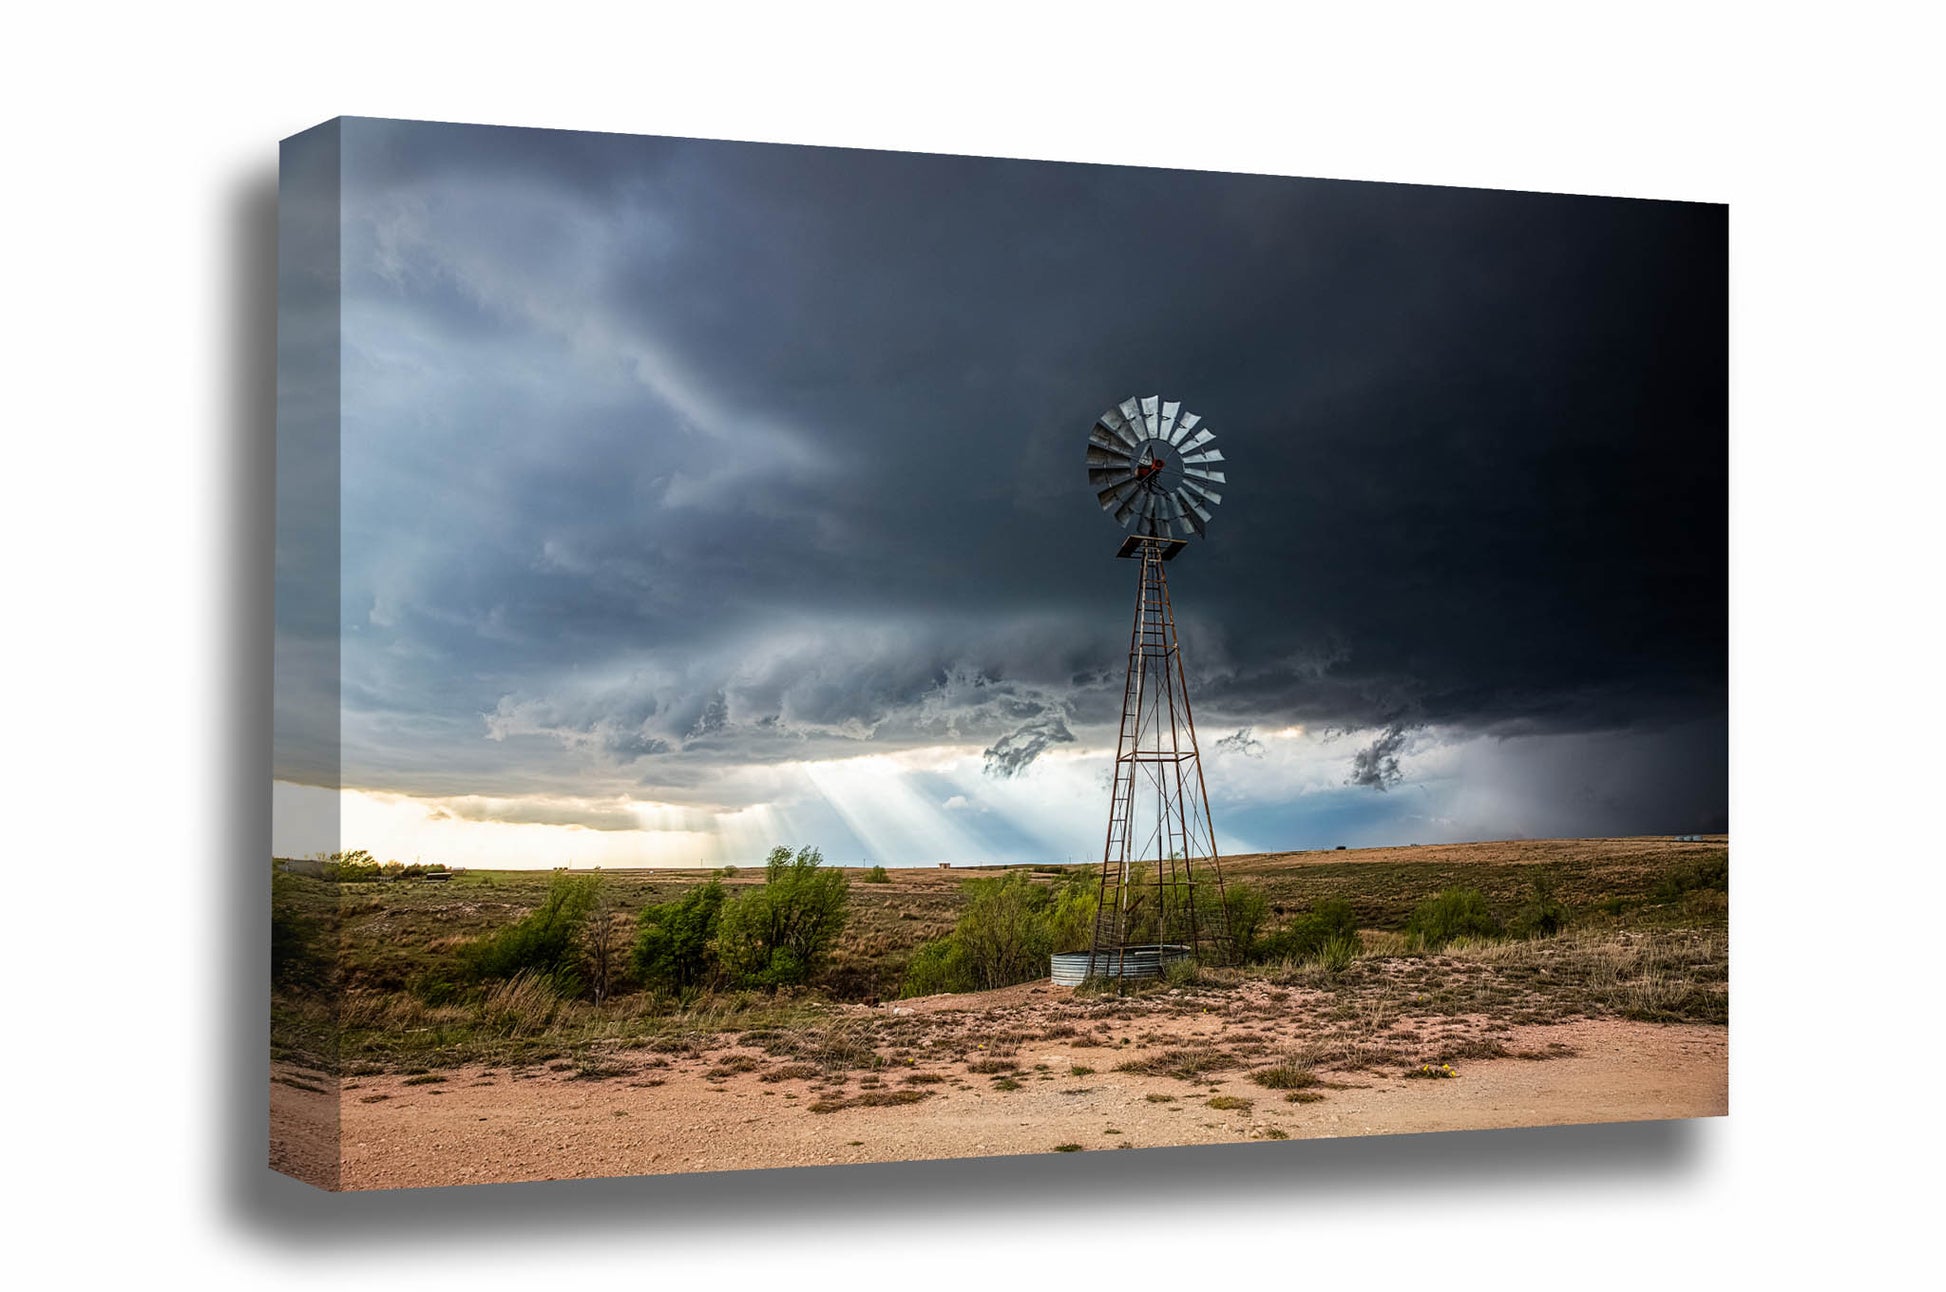 Canvas wall art of a windmill standing tall over the prairie as sunbeams shine through a thunderstorm on a stormy spring day in Texas by Sean Ramsey of Southern Plains Photography.